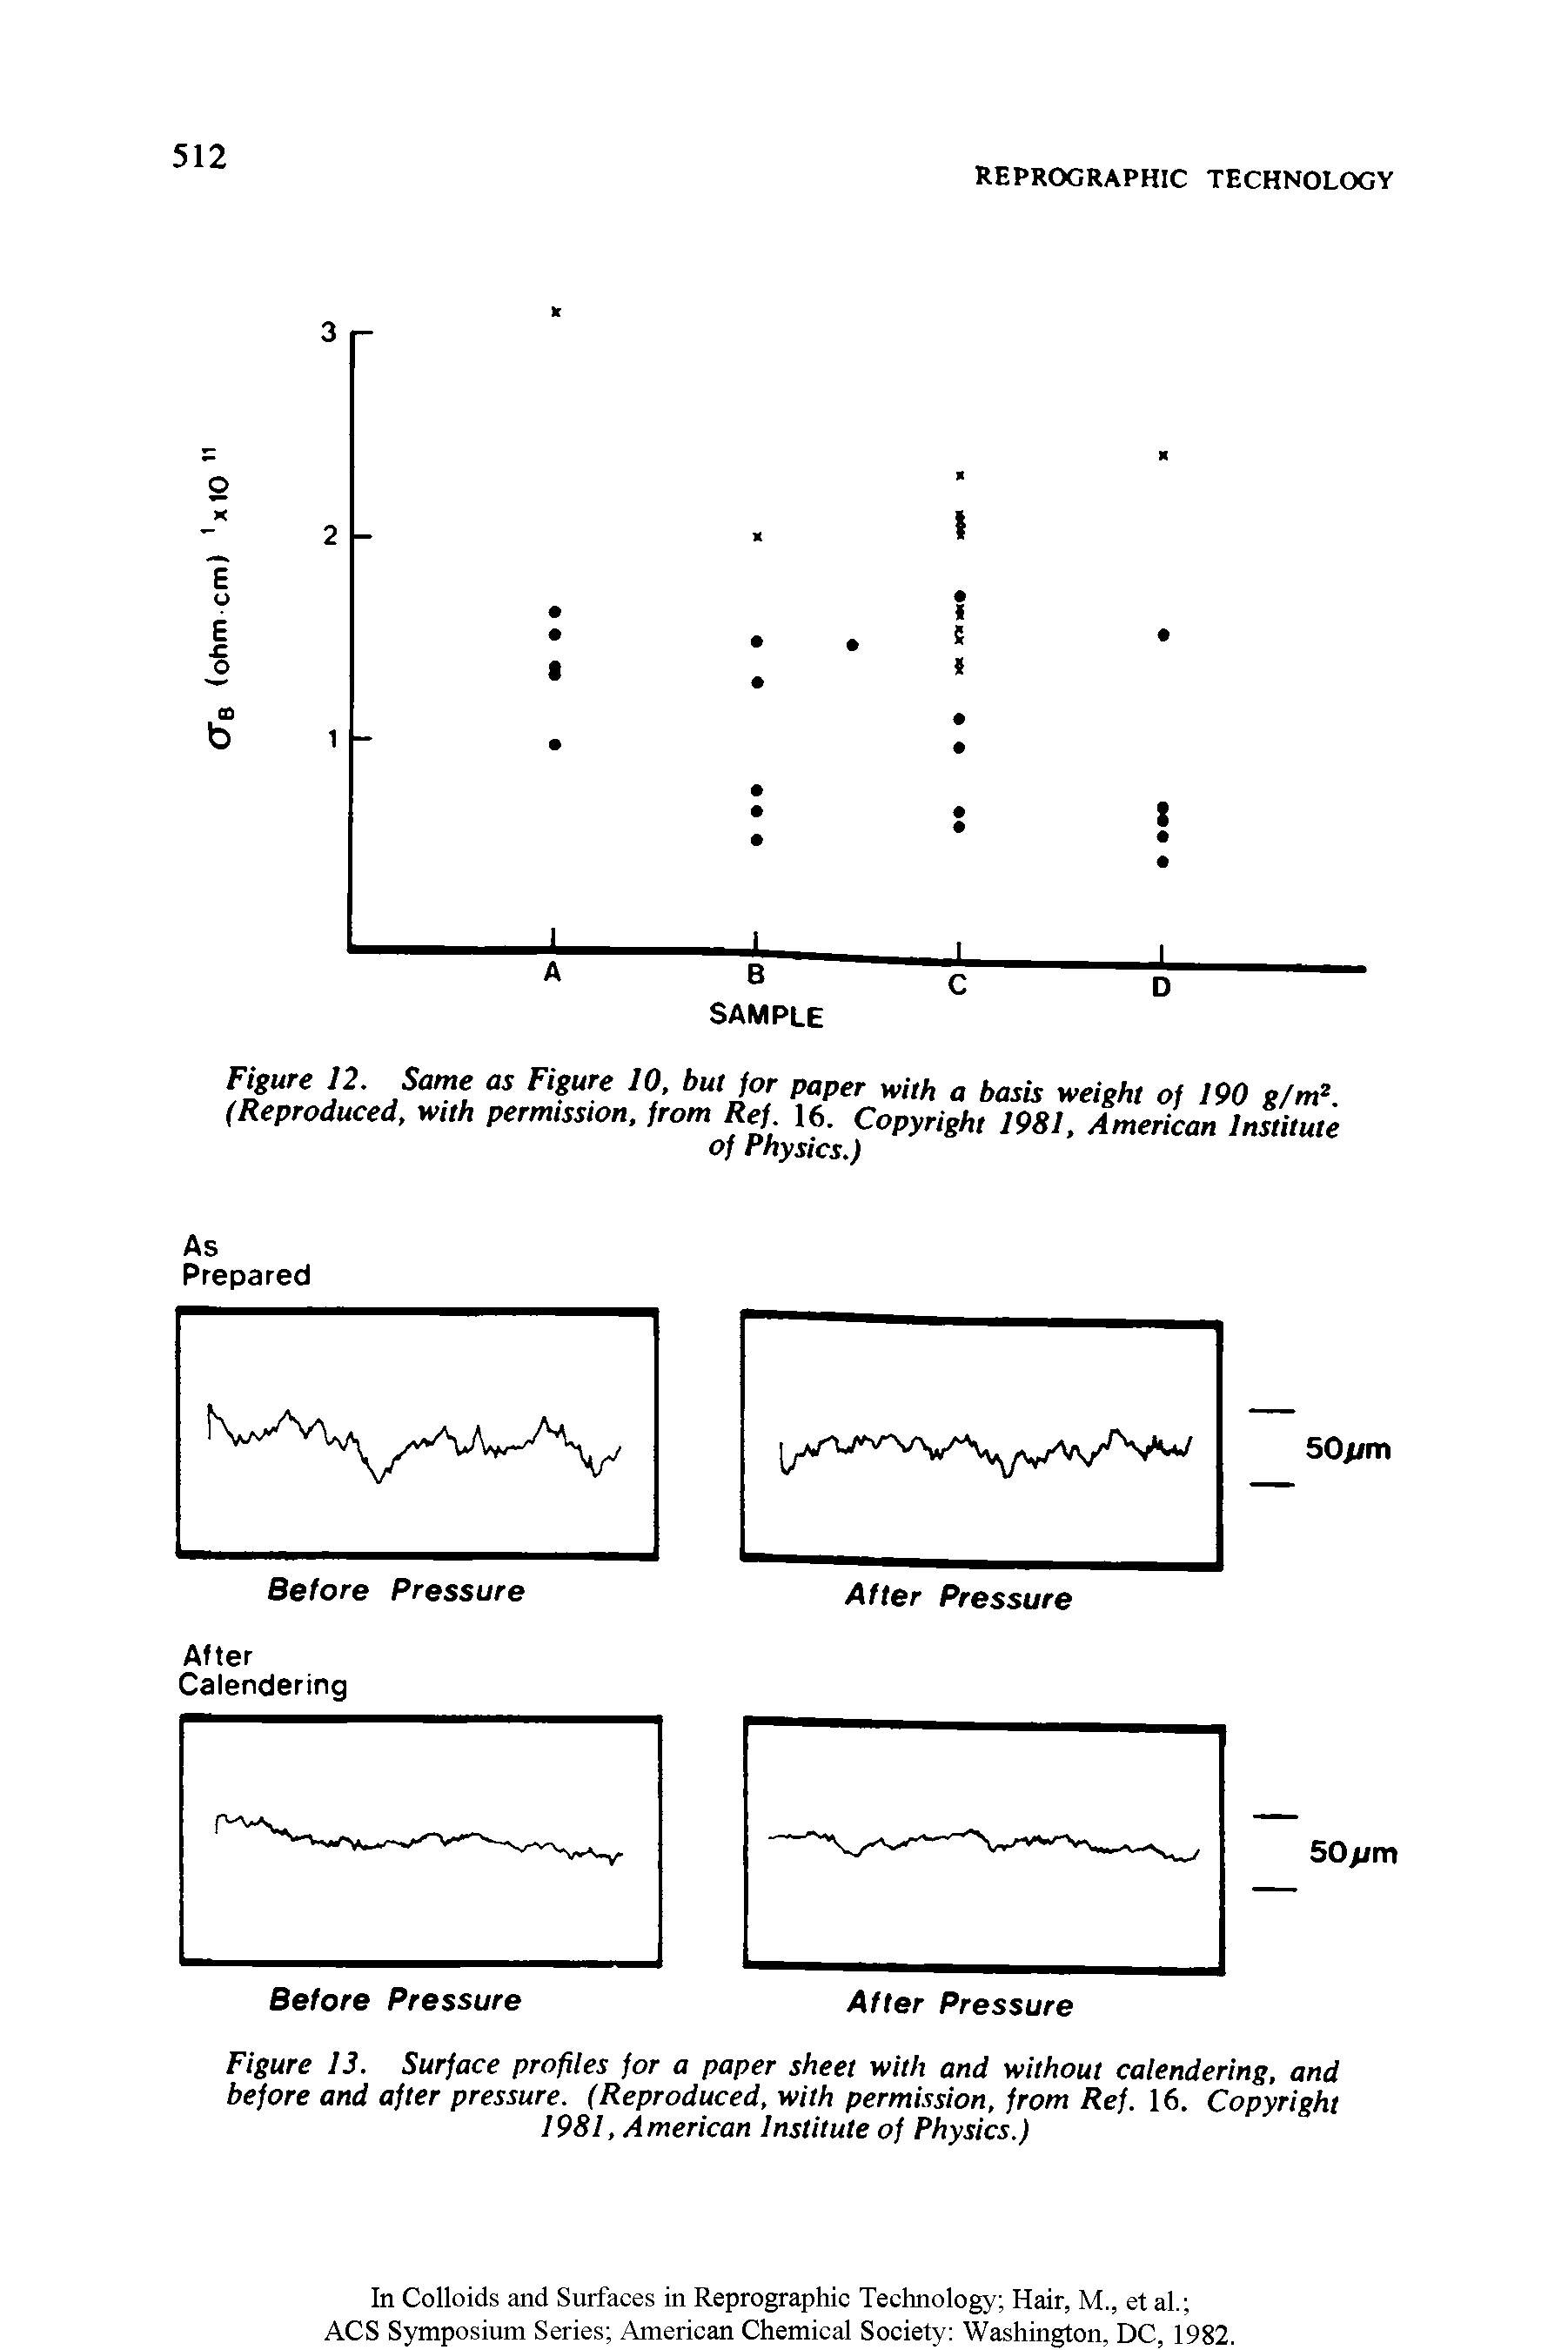 Figure 13. Surface profiles for a paper sheet with and without calendering, and before and after pressure. (Reproduced, with permission, from Ref. 16. Copyright 1981, American Institute of Physics.)...